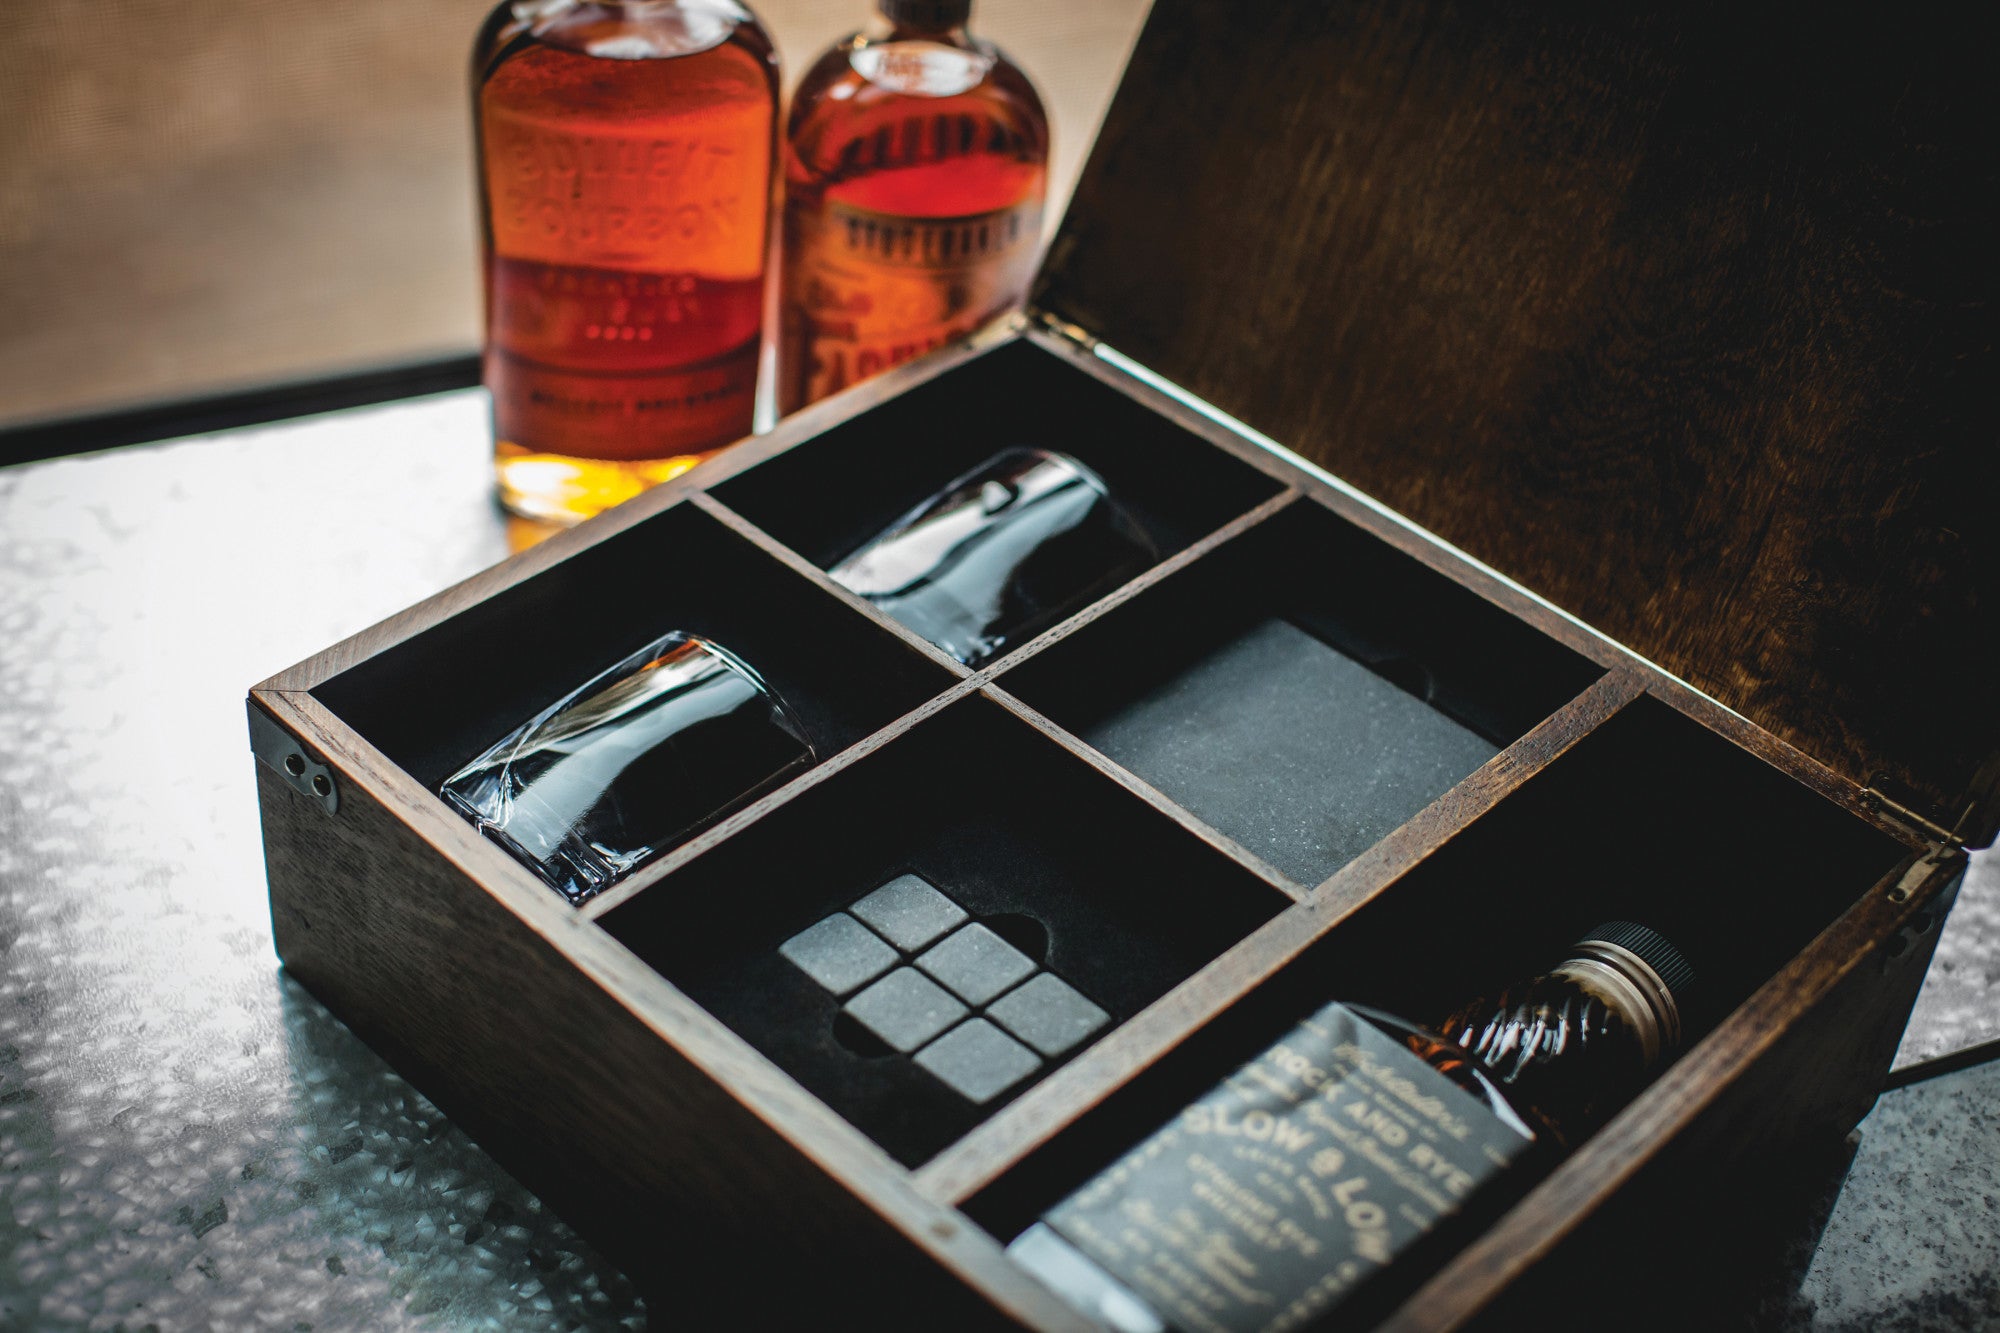 Sveres and Bloxx Gift Set – The Whiskey Ball